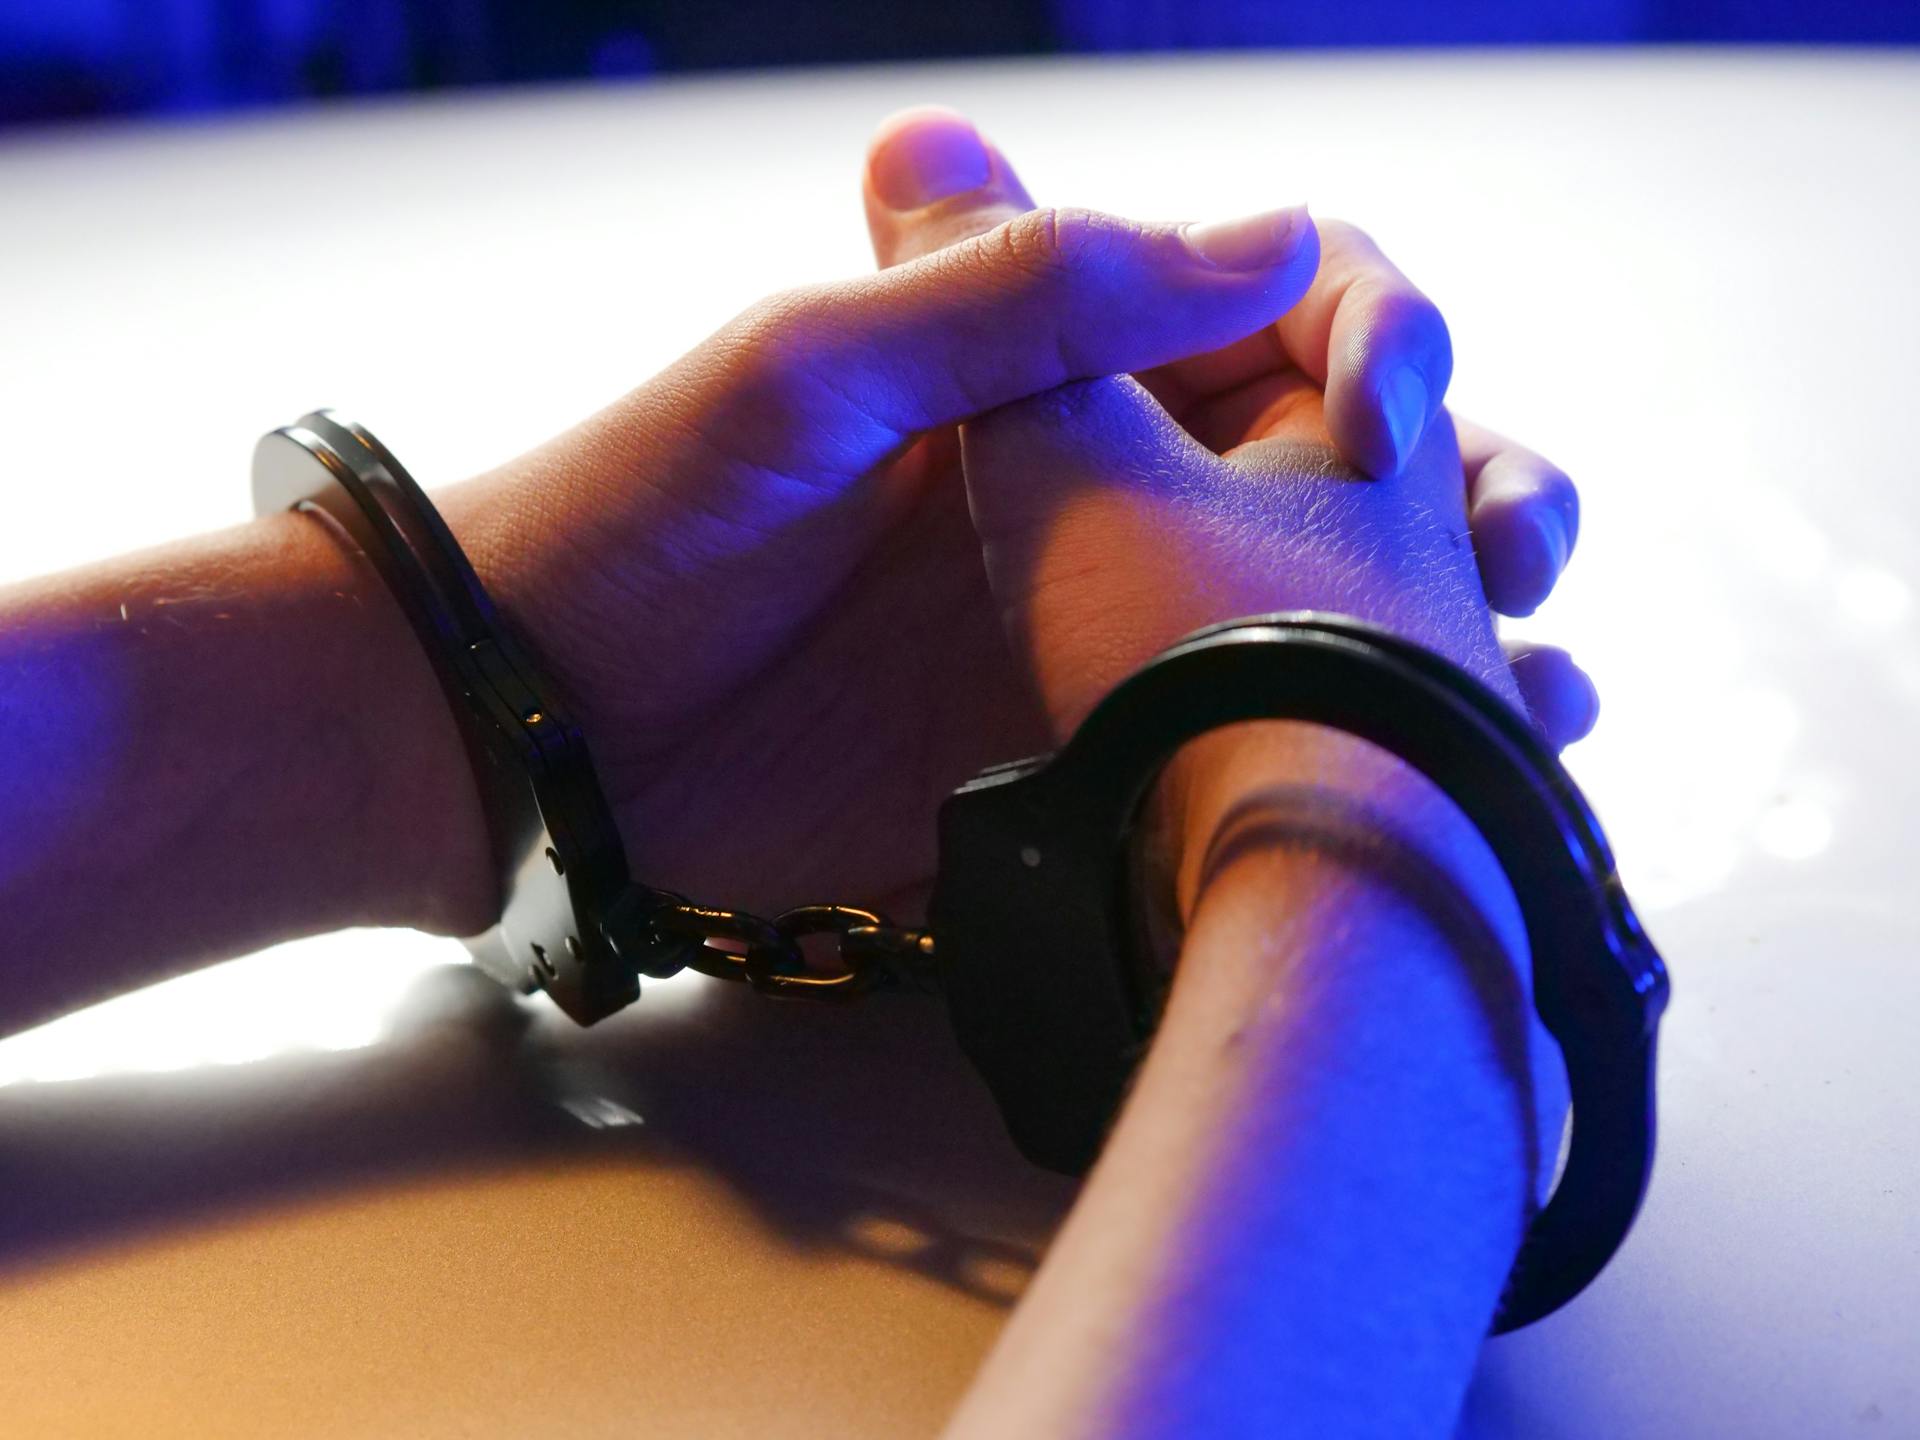 Person wearing handcuffs | Source: Pexels